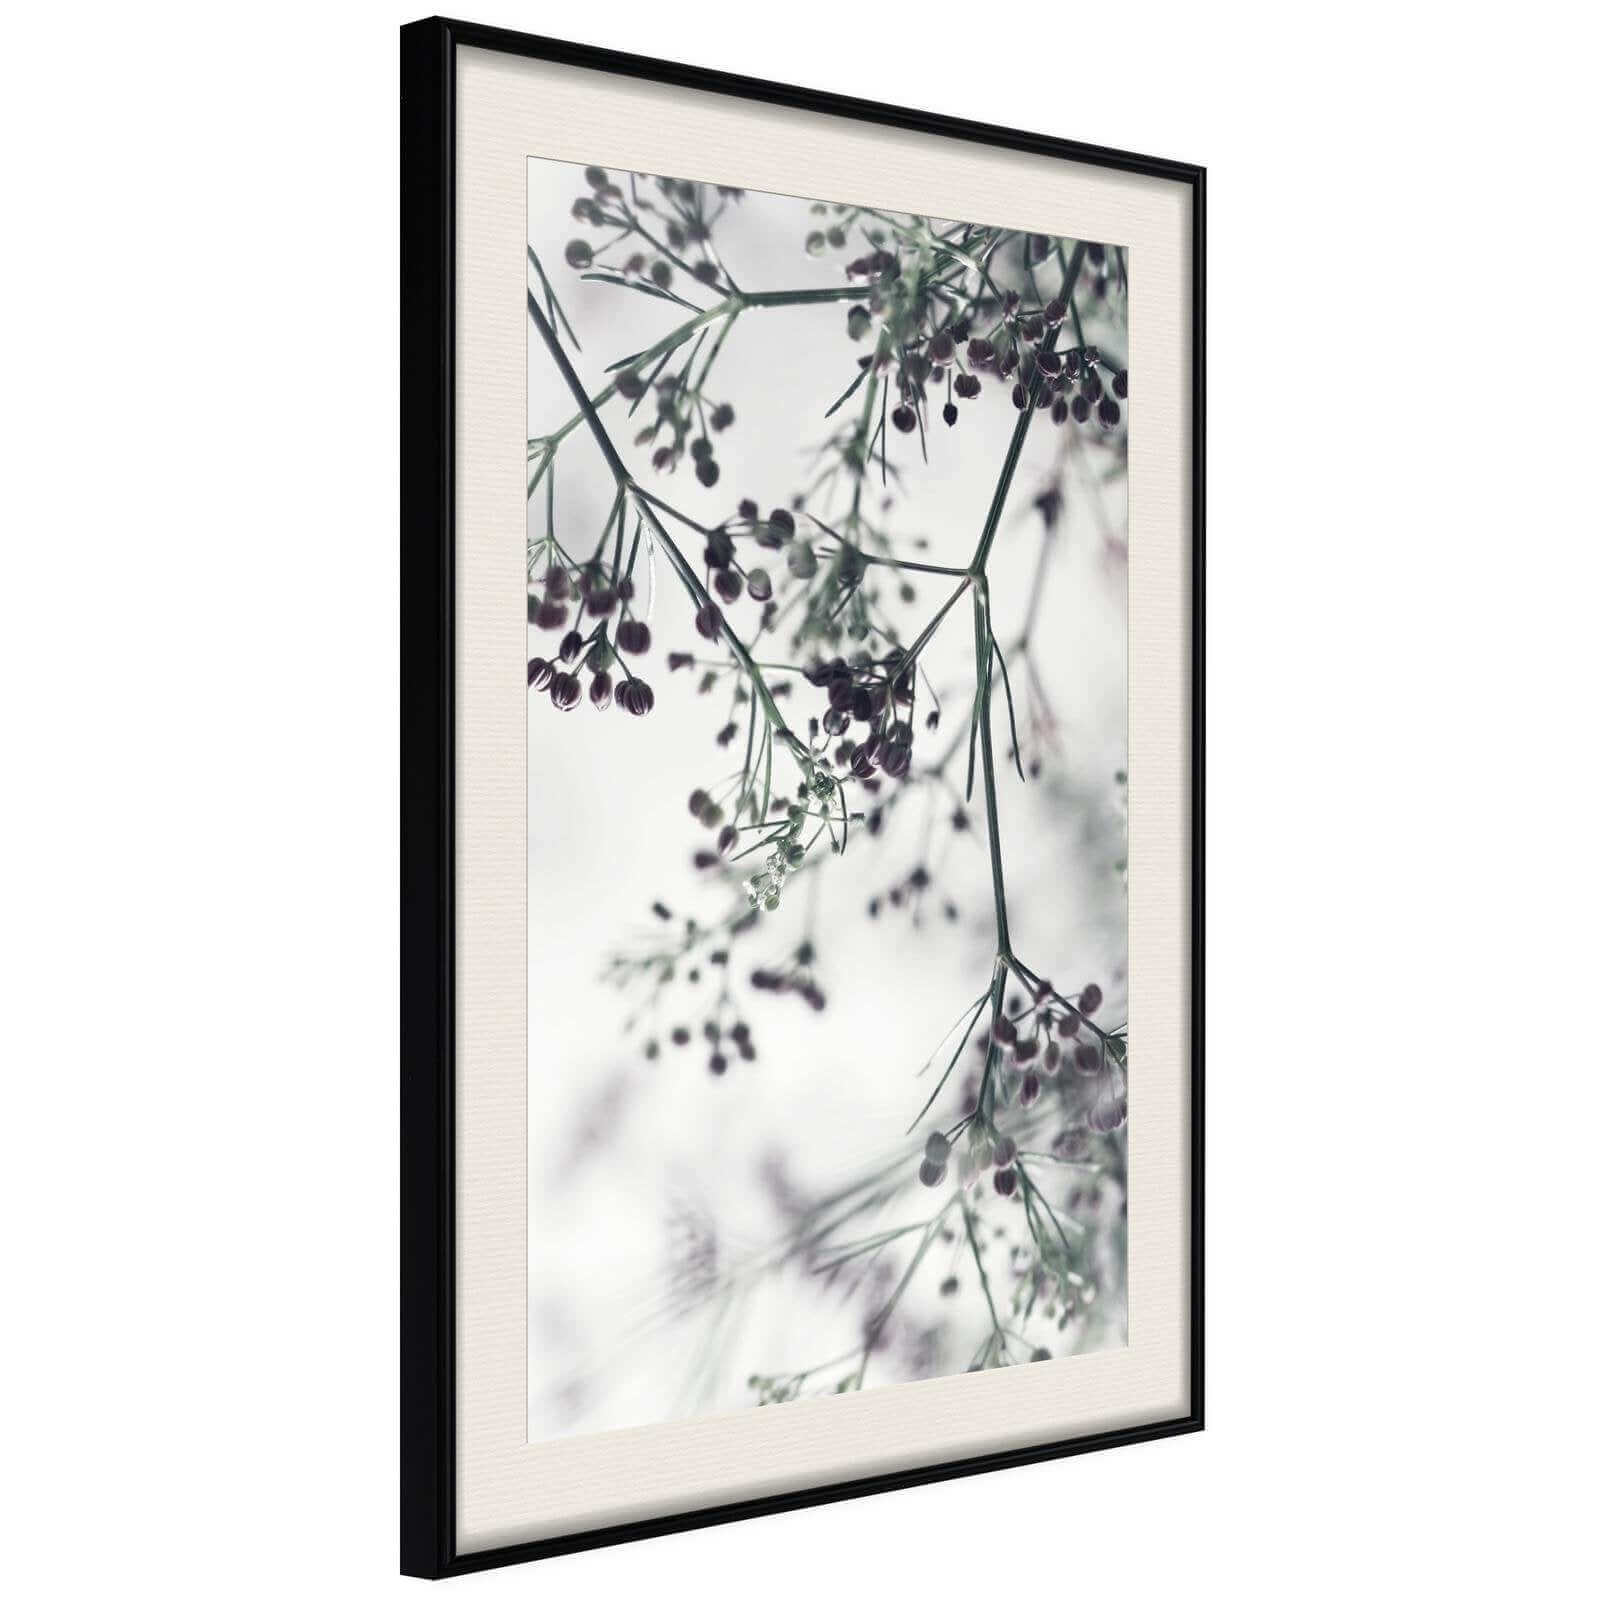 Sprinkled with Flowers, Artgeist, black and white, nature, plants, poster style